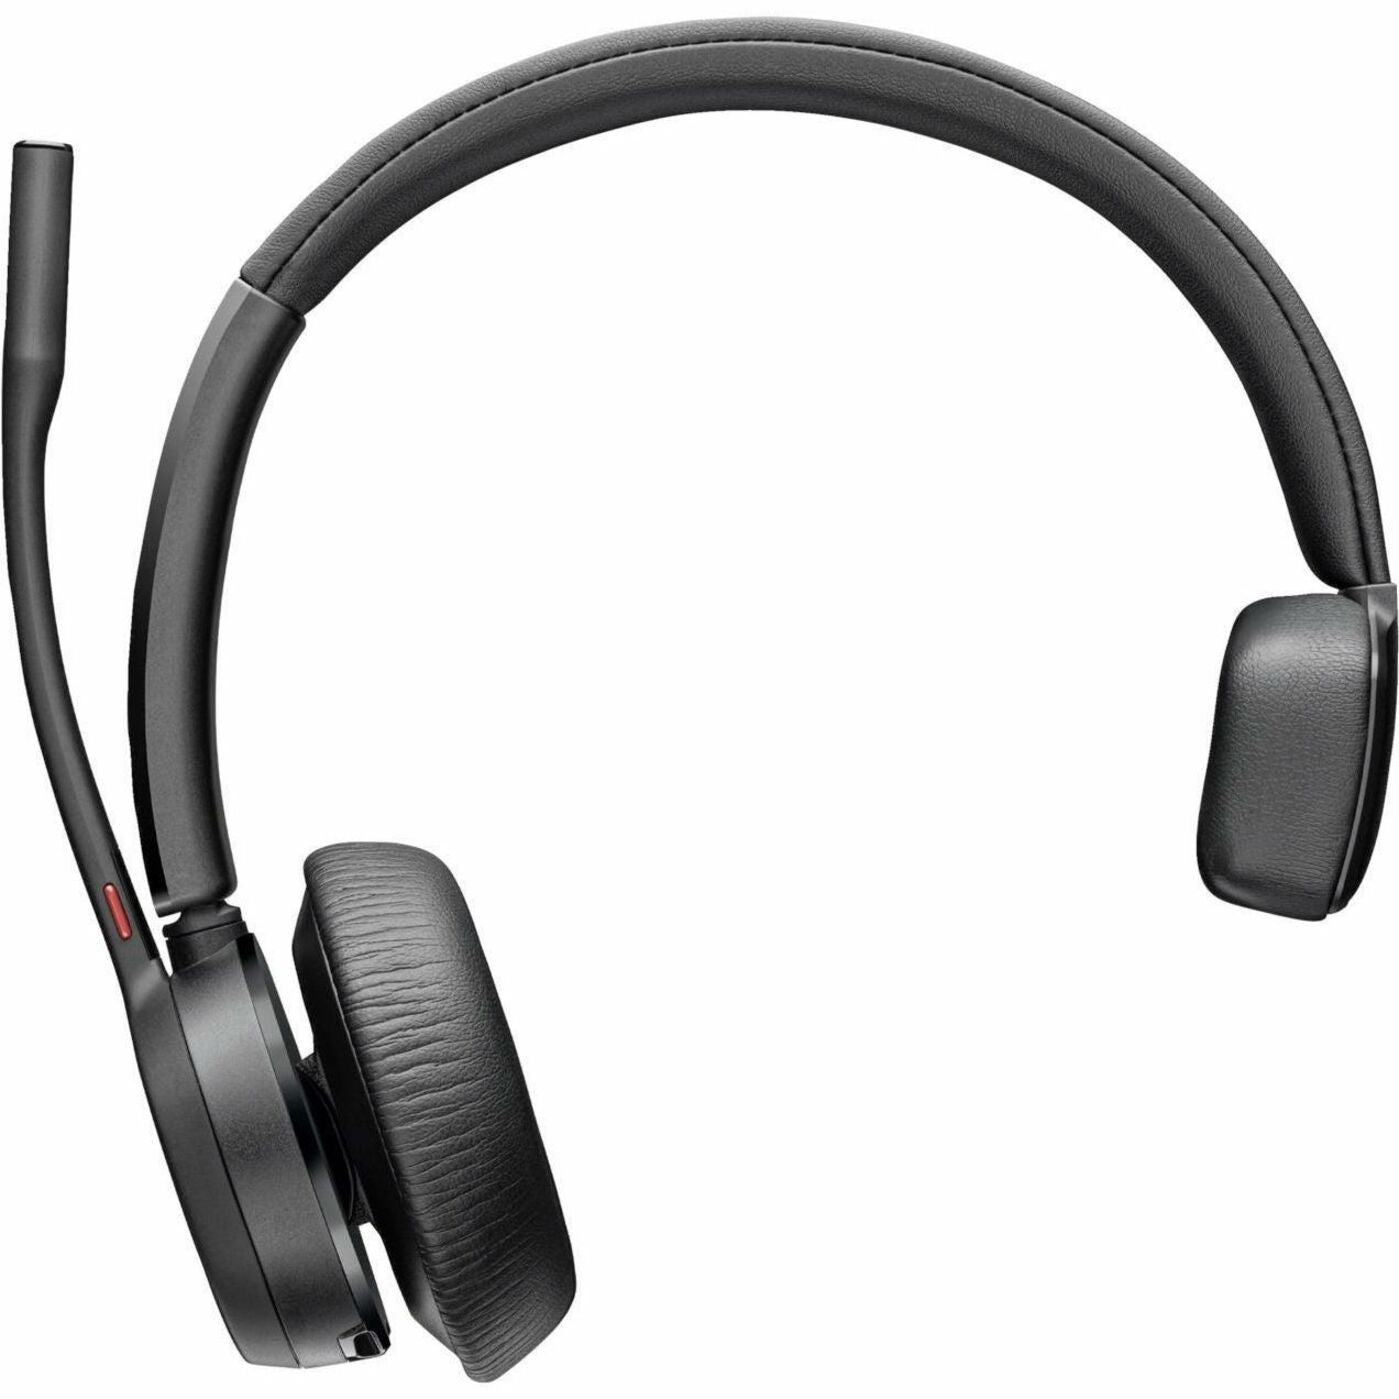 Poly 77Y95AA Voyager 4310 Microsoft Teams Certified USB-C Headset +BT700 dongle, On-ear Stereo Headset with Noise Canceling, 2 Year Warranty